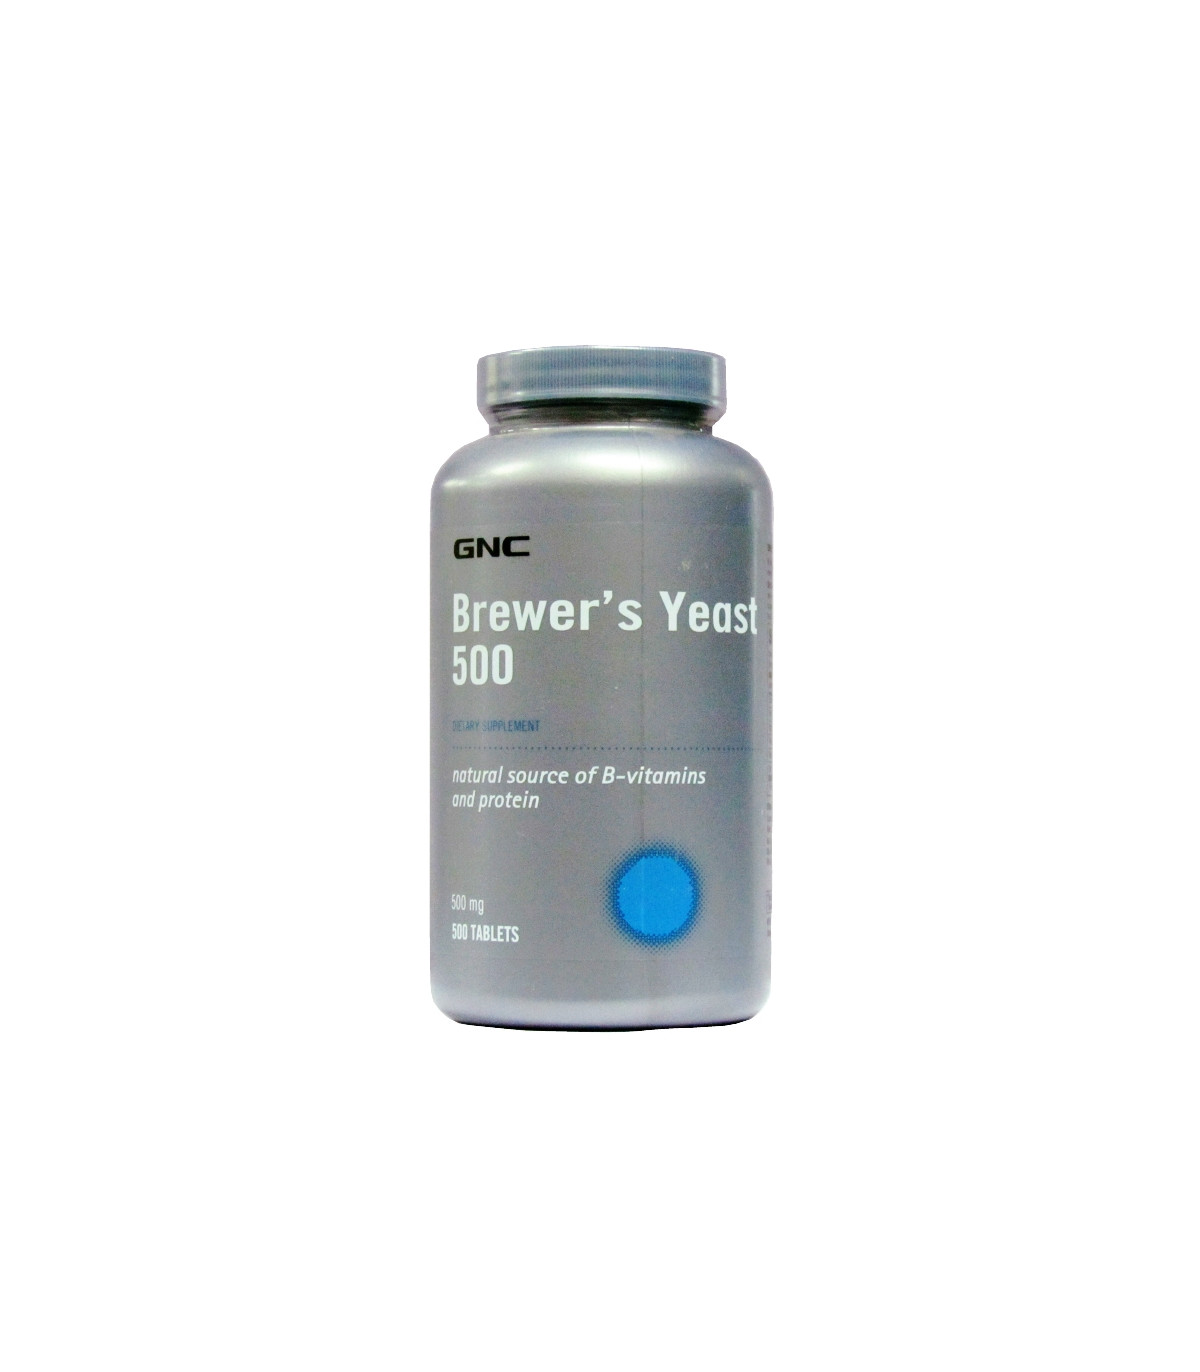 GNC Brewer's Yeast - 500 Tablets